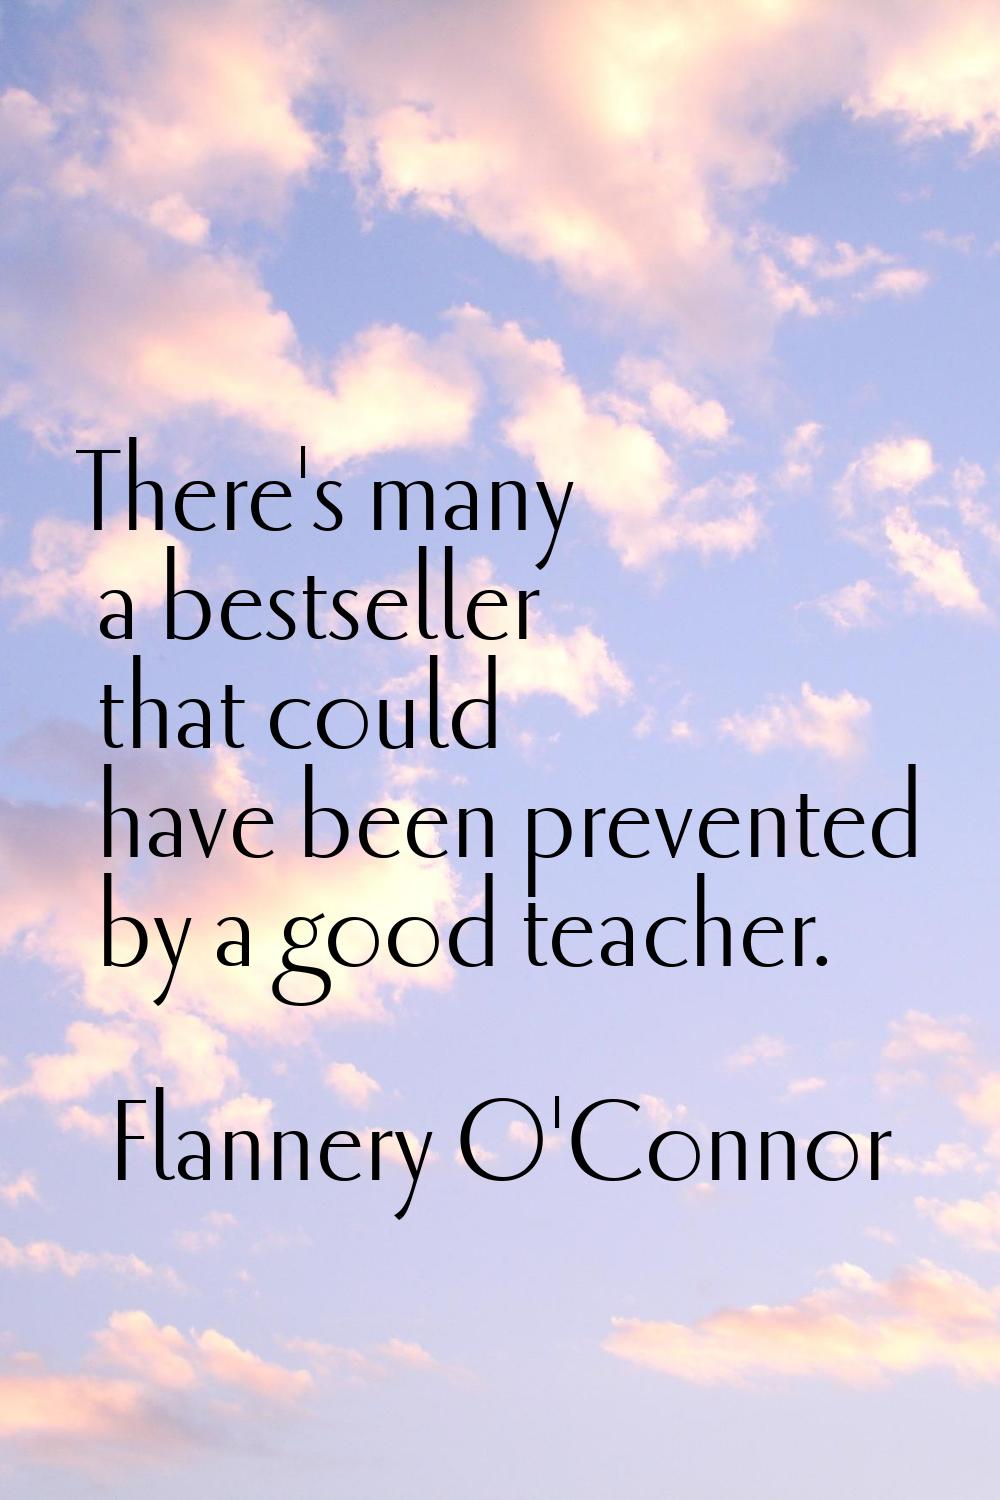 There's many a bestseller that could have been prevented by a good teacher.